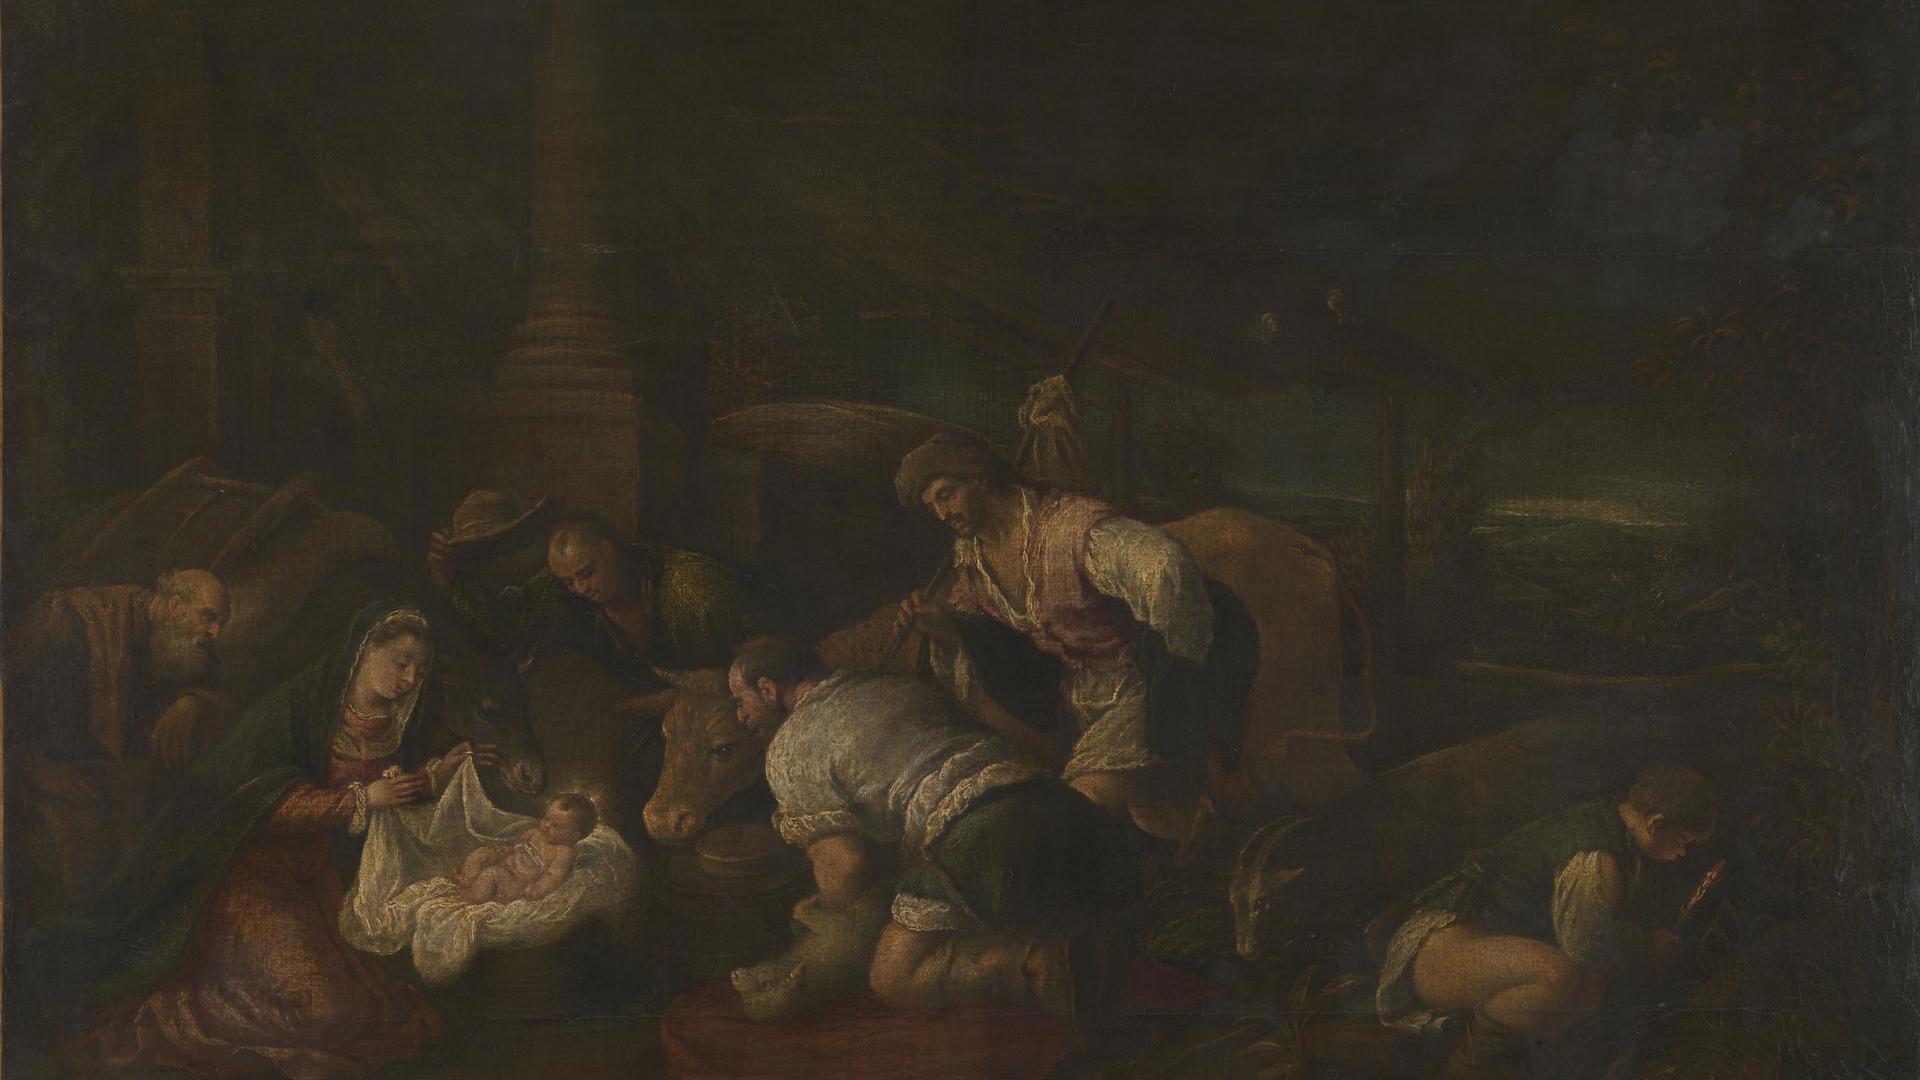 The Adoration of the Shepherds by Follower of Jacopo Bassano